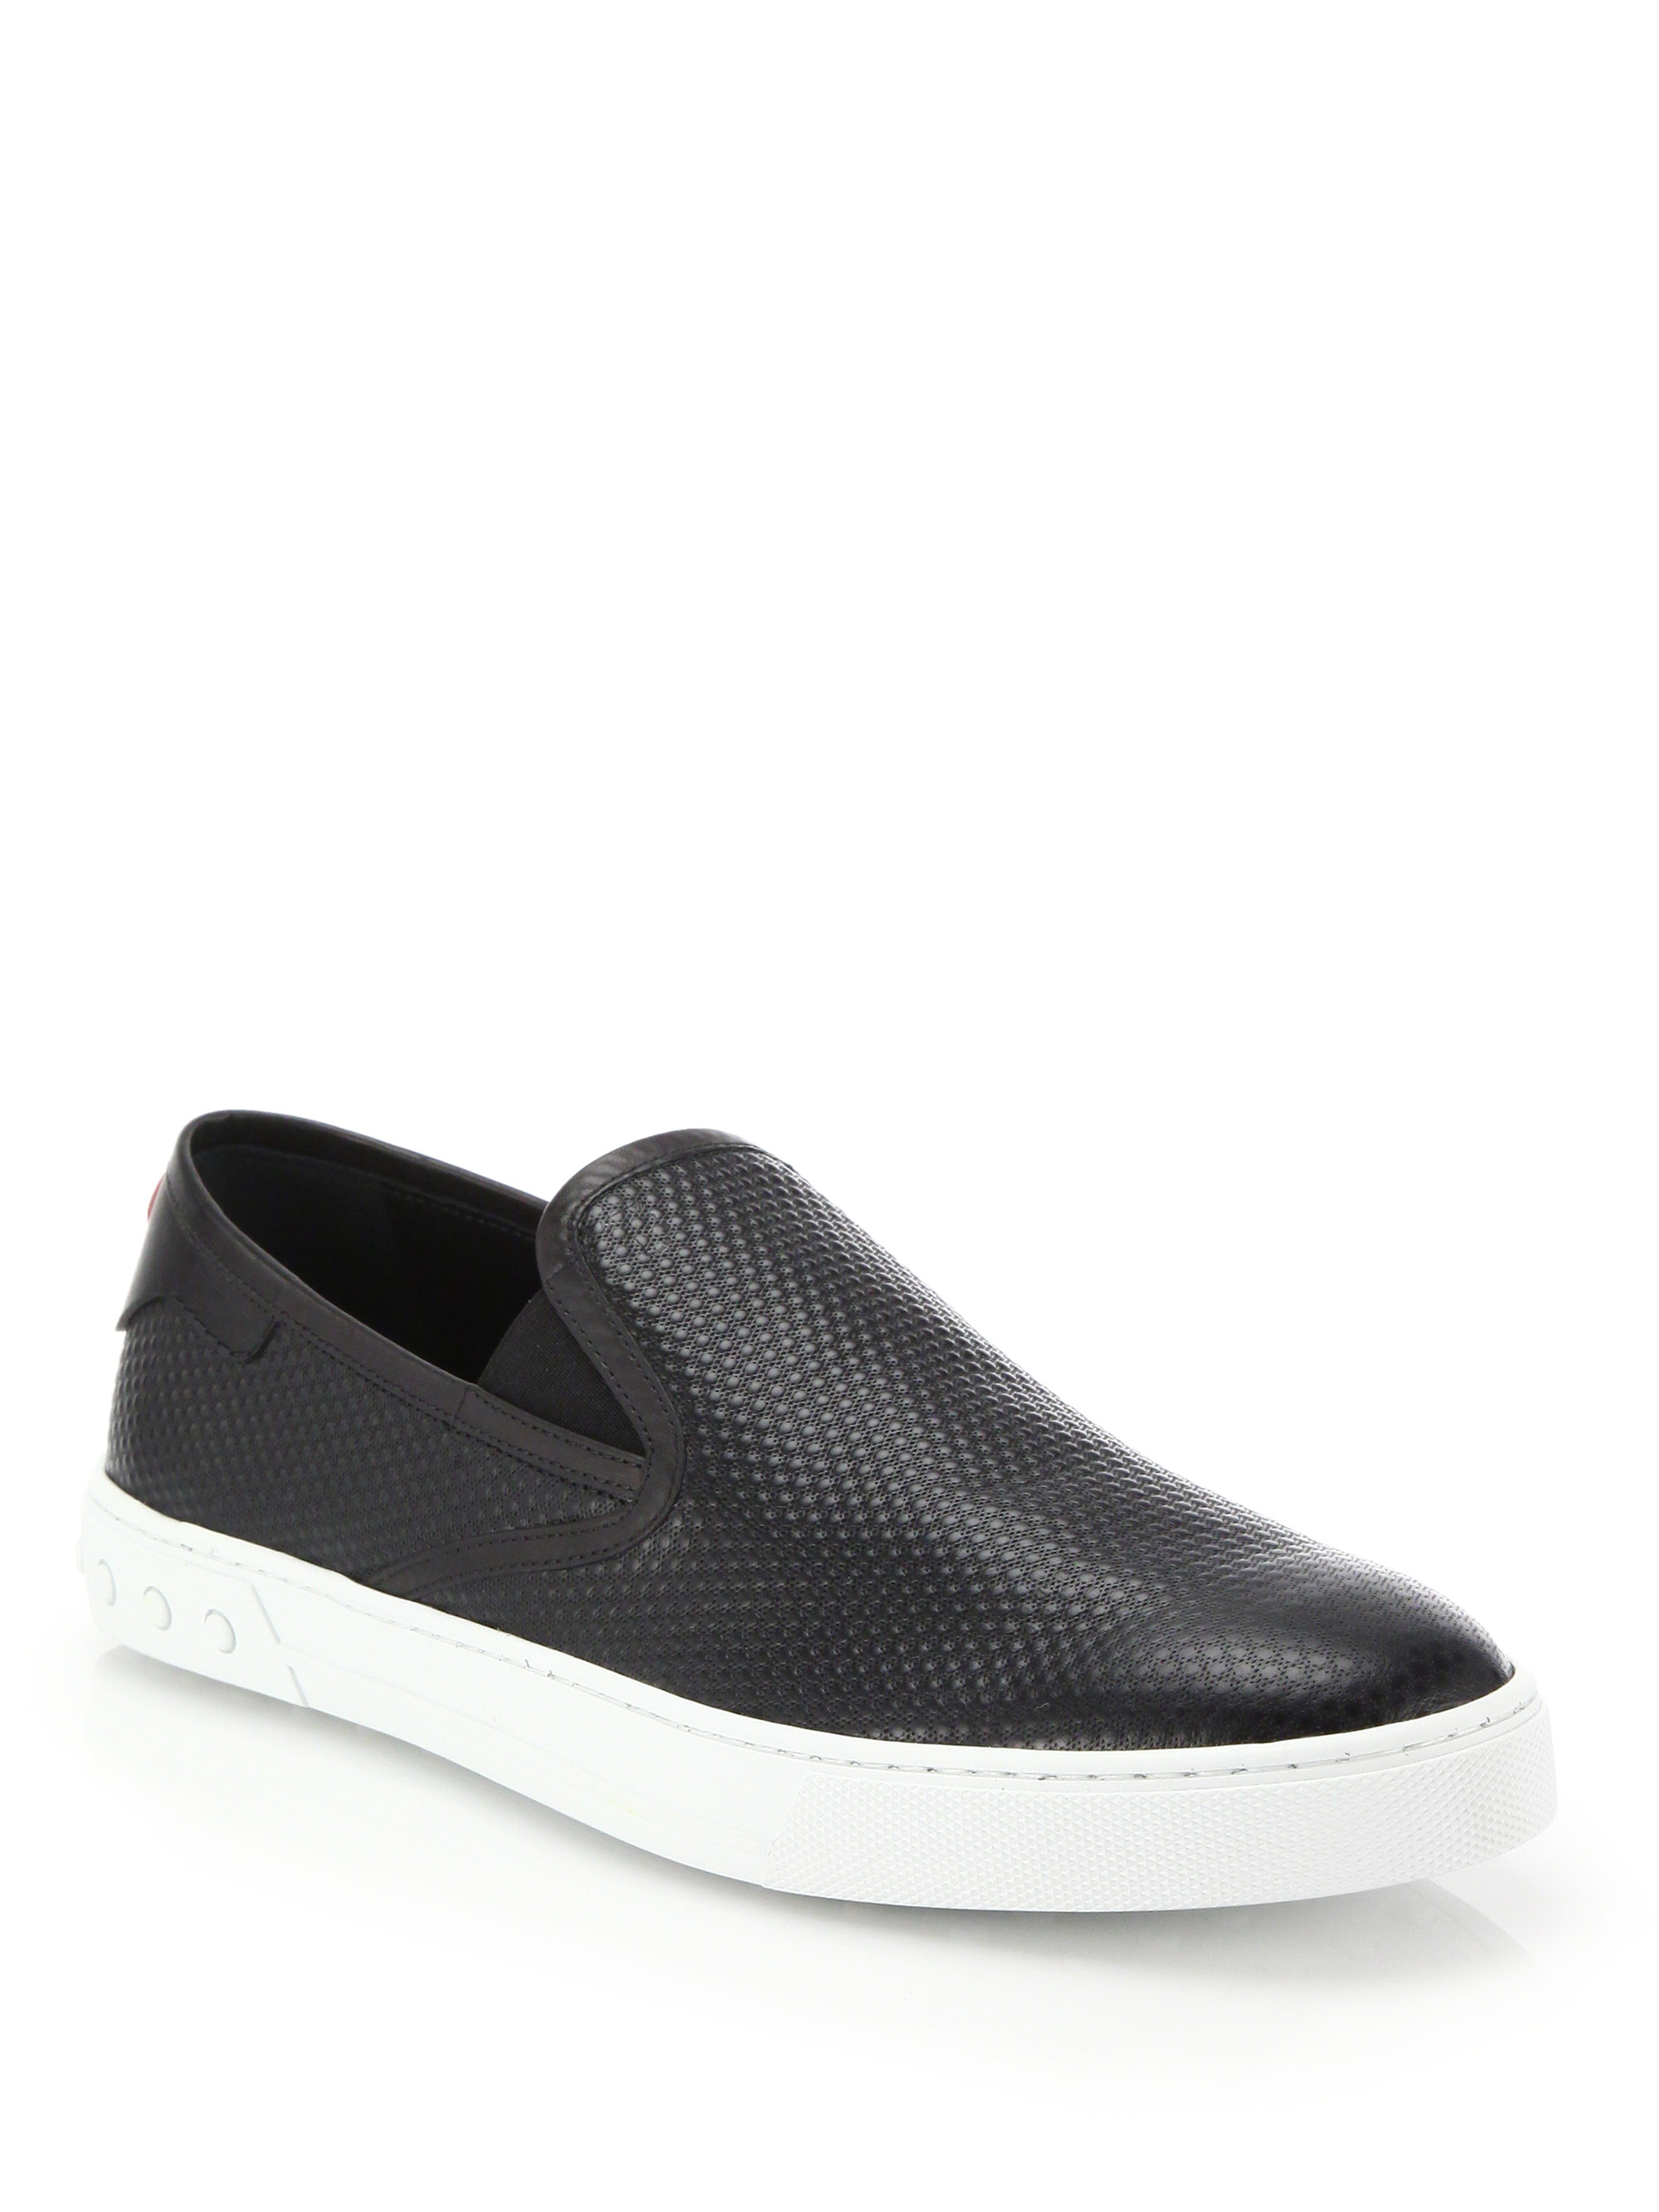 Tod's Textured Leather Slip-on Sneakers in Black for Men - Lyst